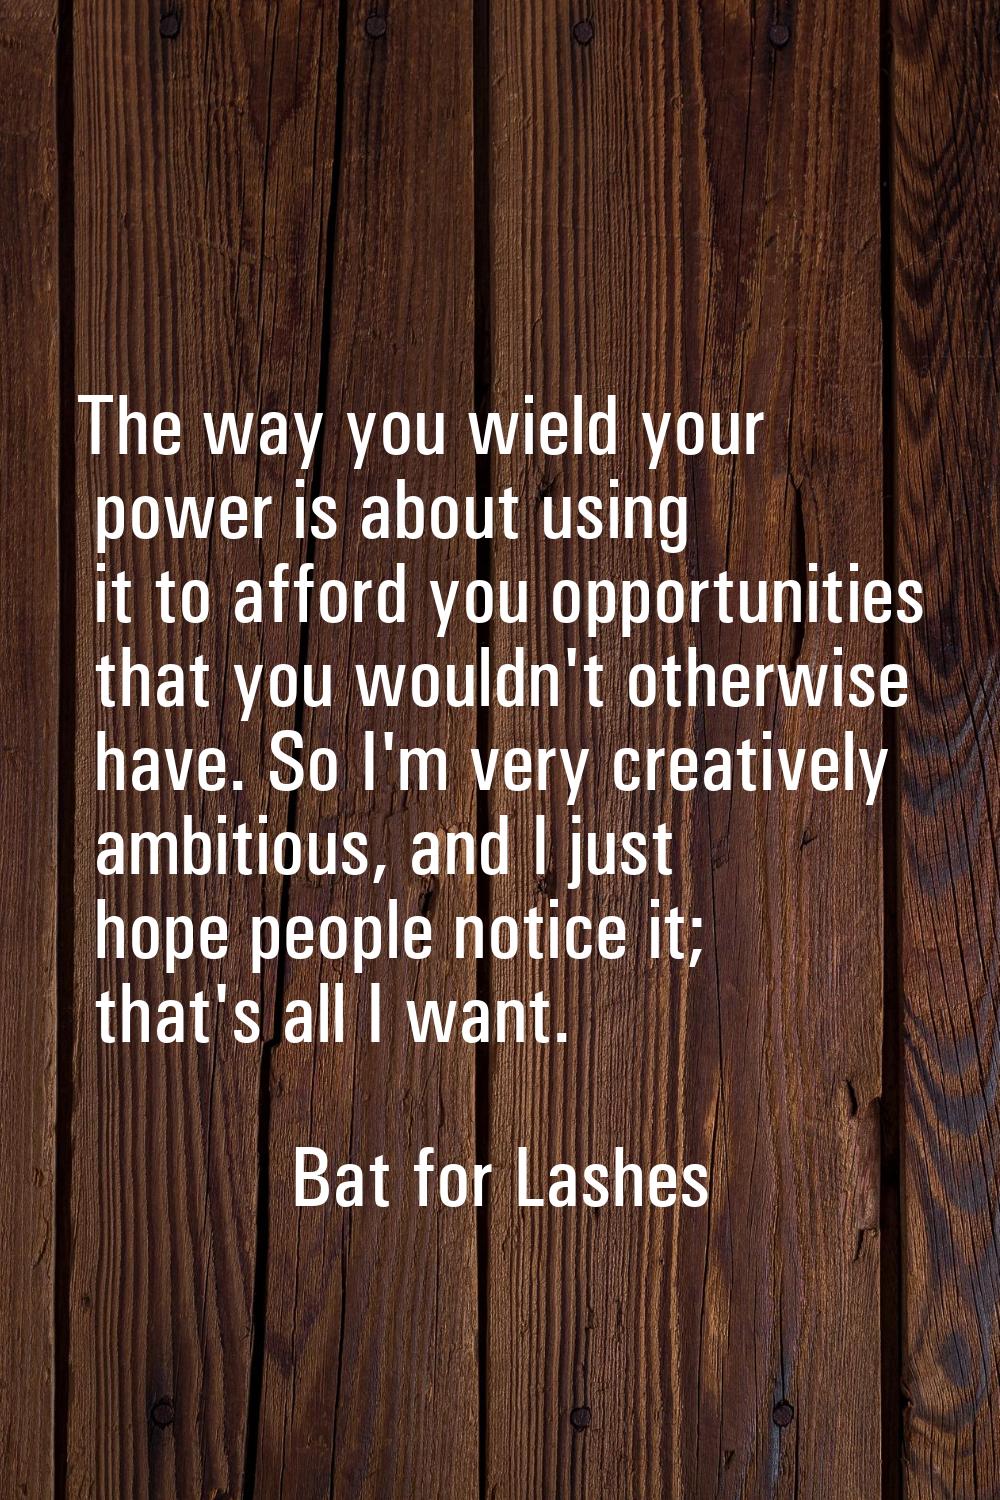 The way you wield your power is about using it to afford you opportunities that you wouldn't otherw